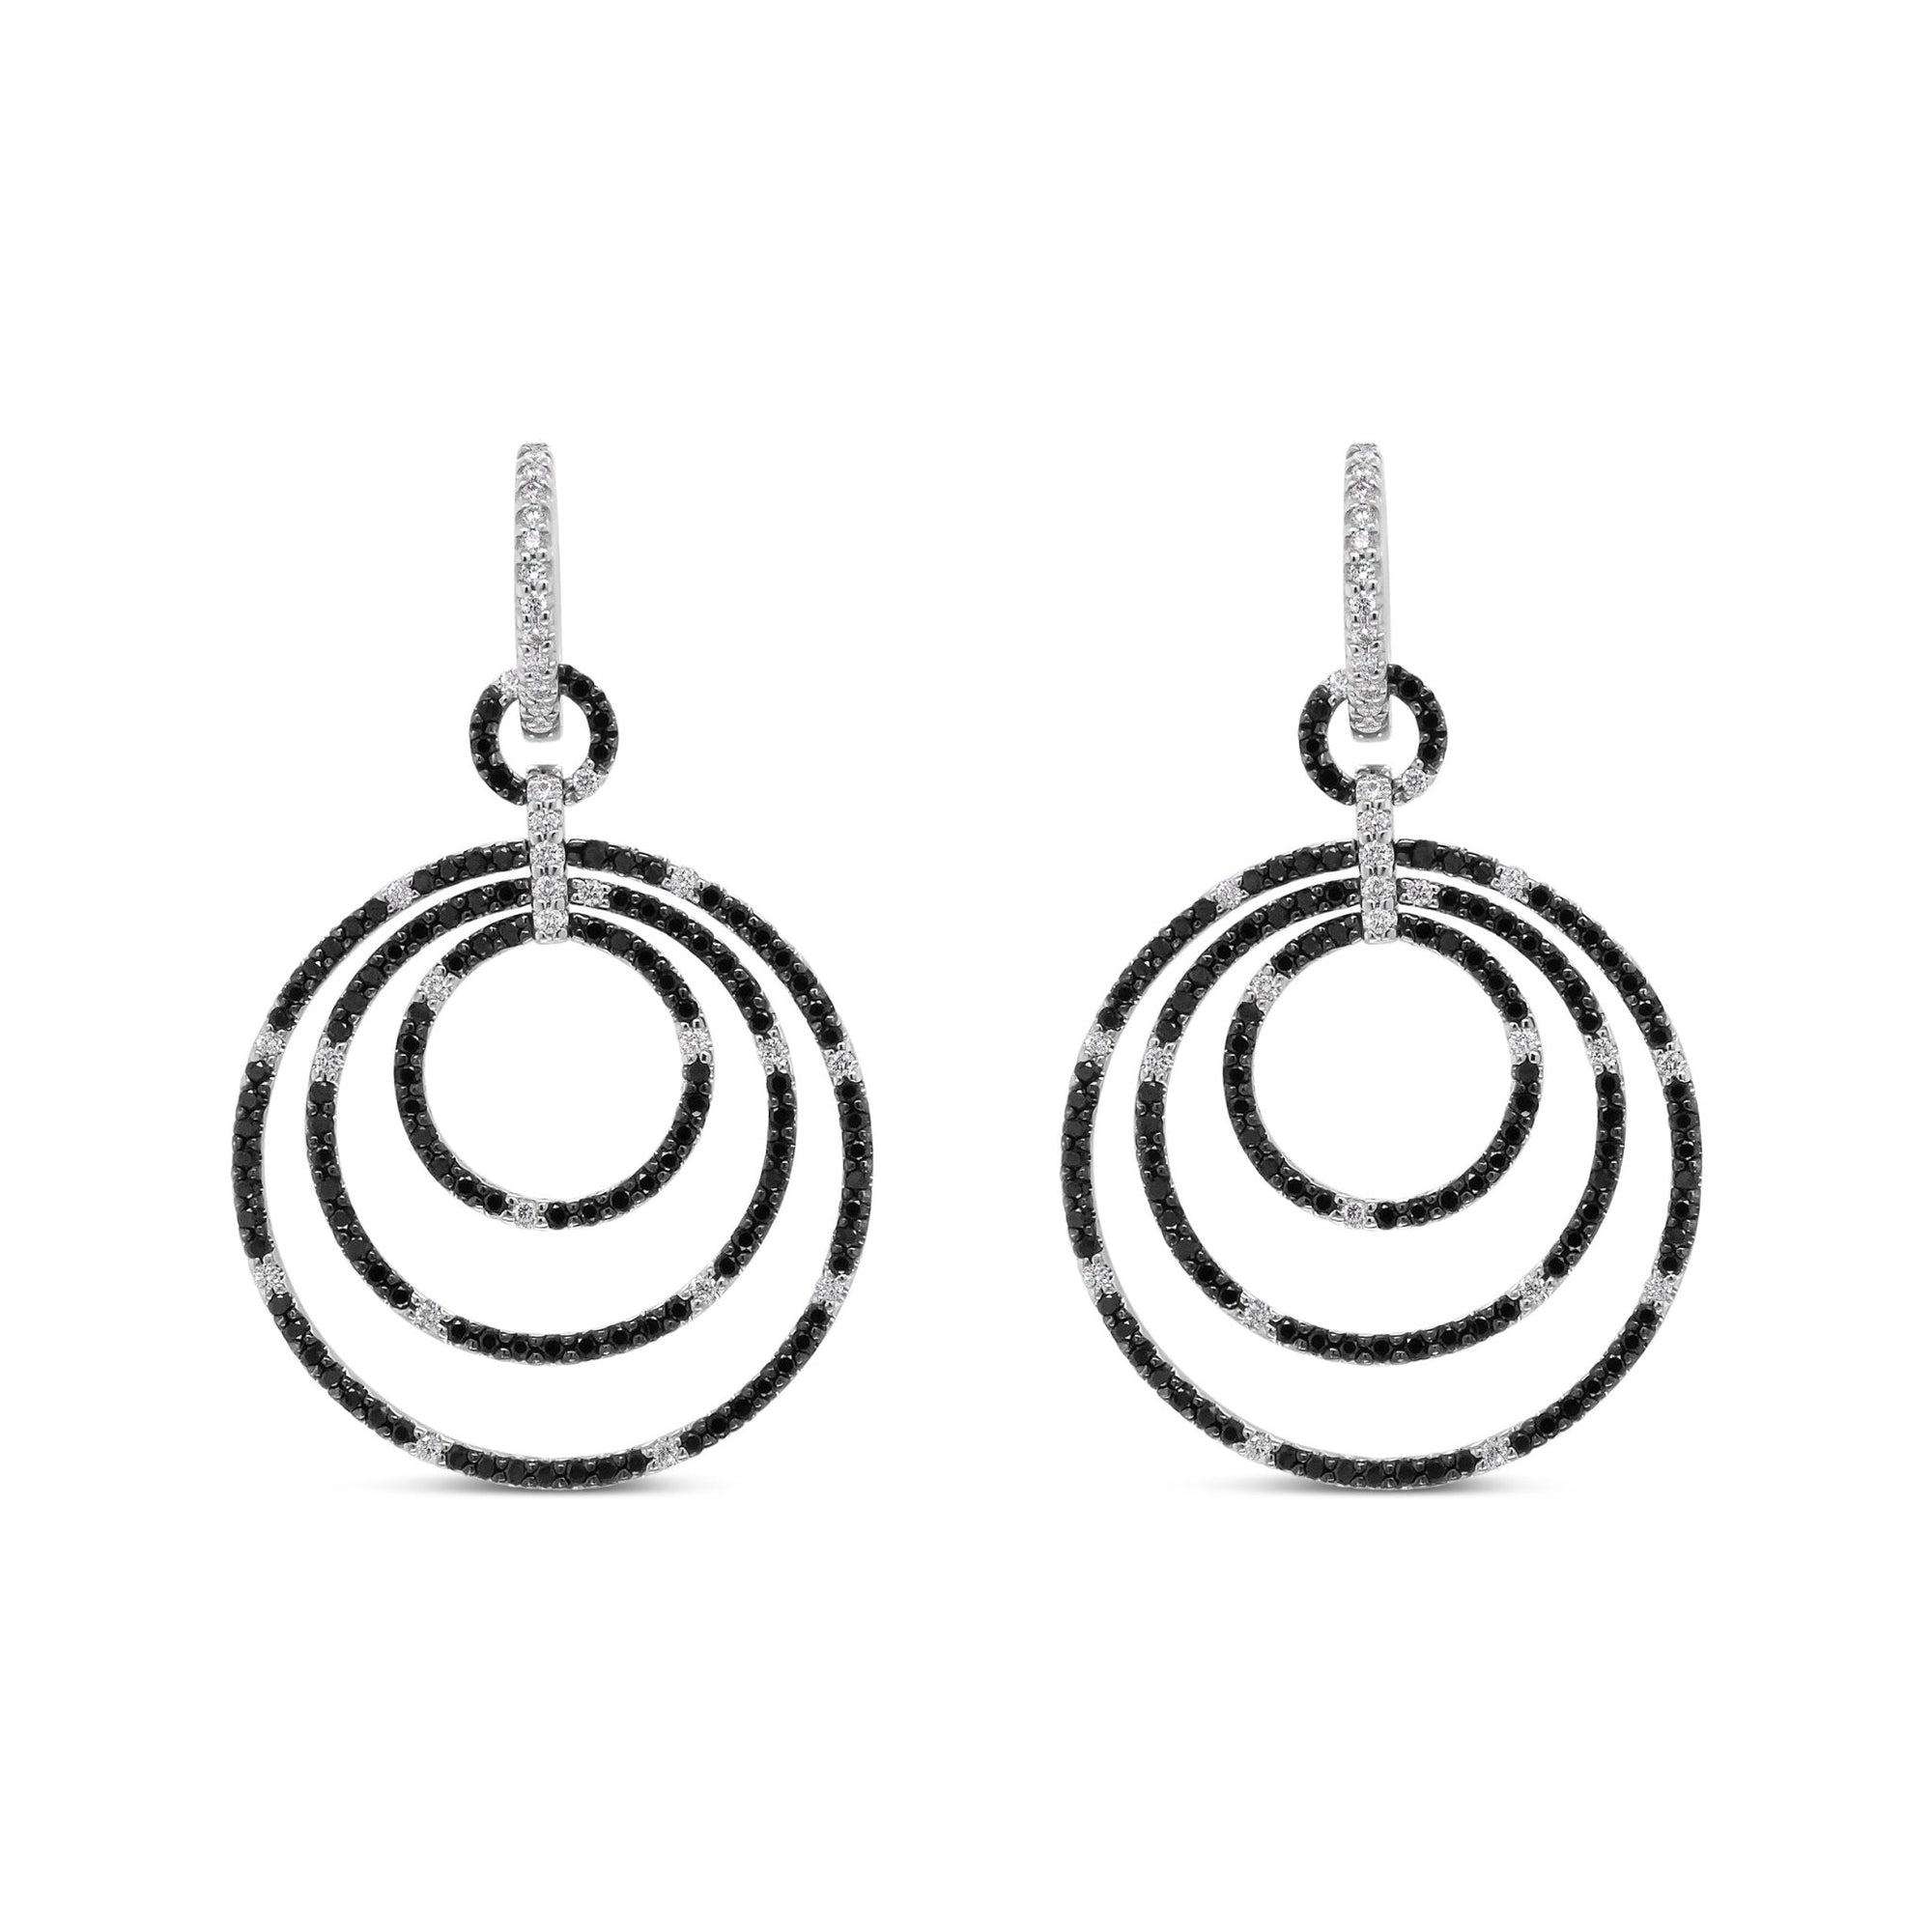 18K White Gold Round 2 1/3 Cttw Black and White Diamond Graduated Hoop Dangle Earrings (Black and F-G Color, VS1-VS2 Clarity) - LinkagejewelrydesignLinkagejewelrydesign